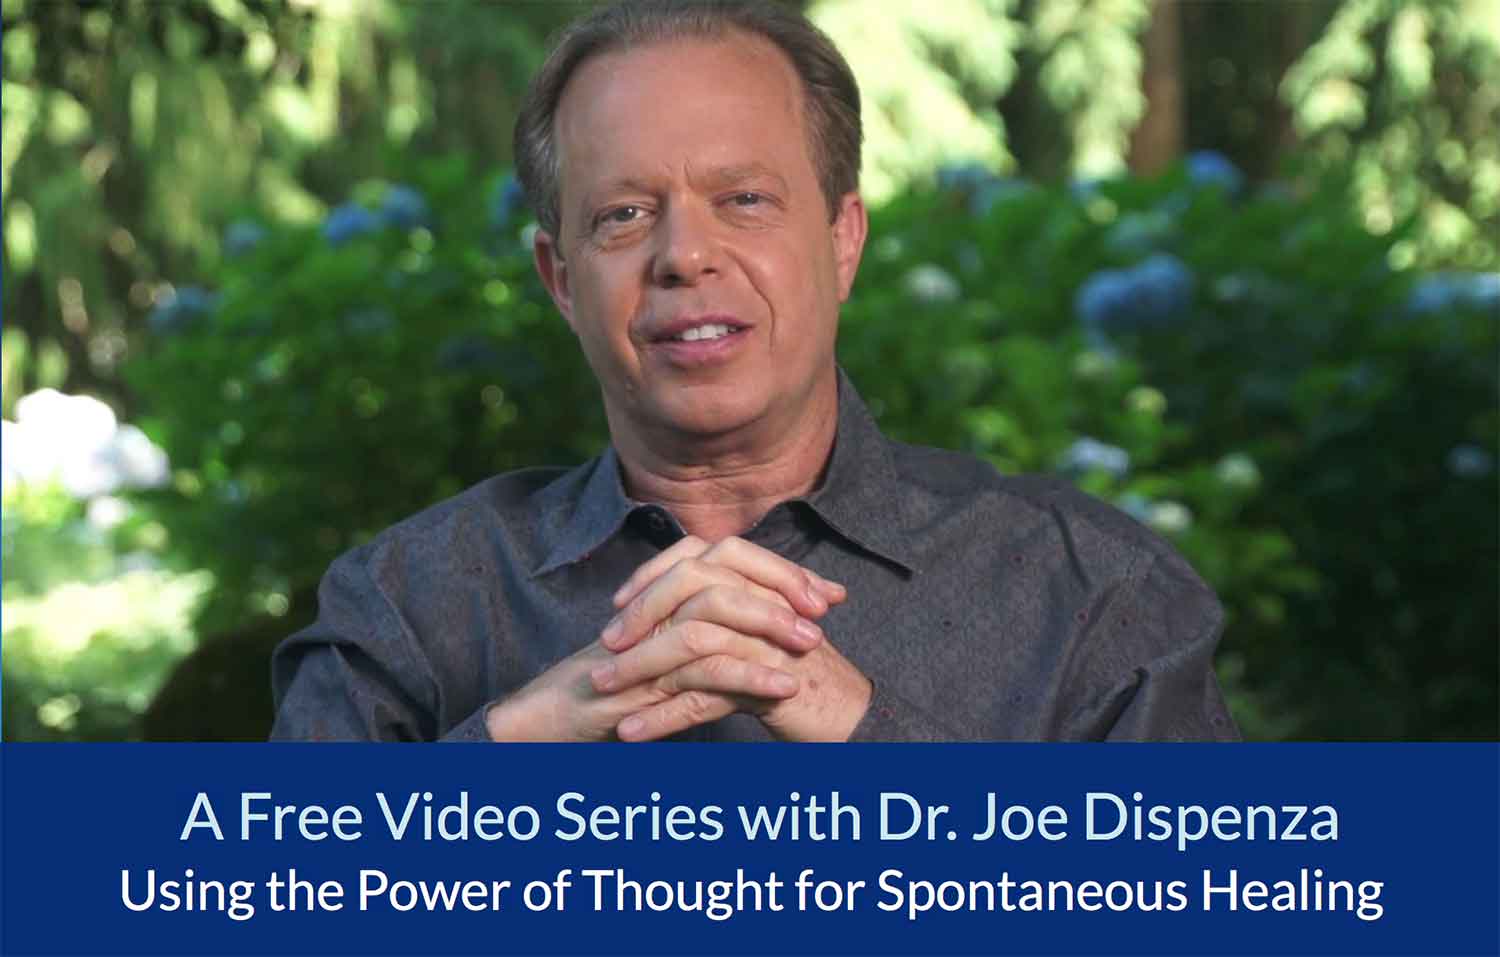 Dr. Joe Dispenza - Using the Power of Thought for Spontaneous Healing